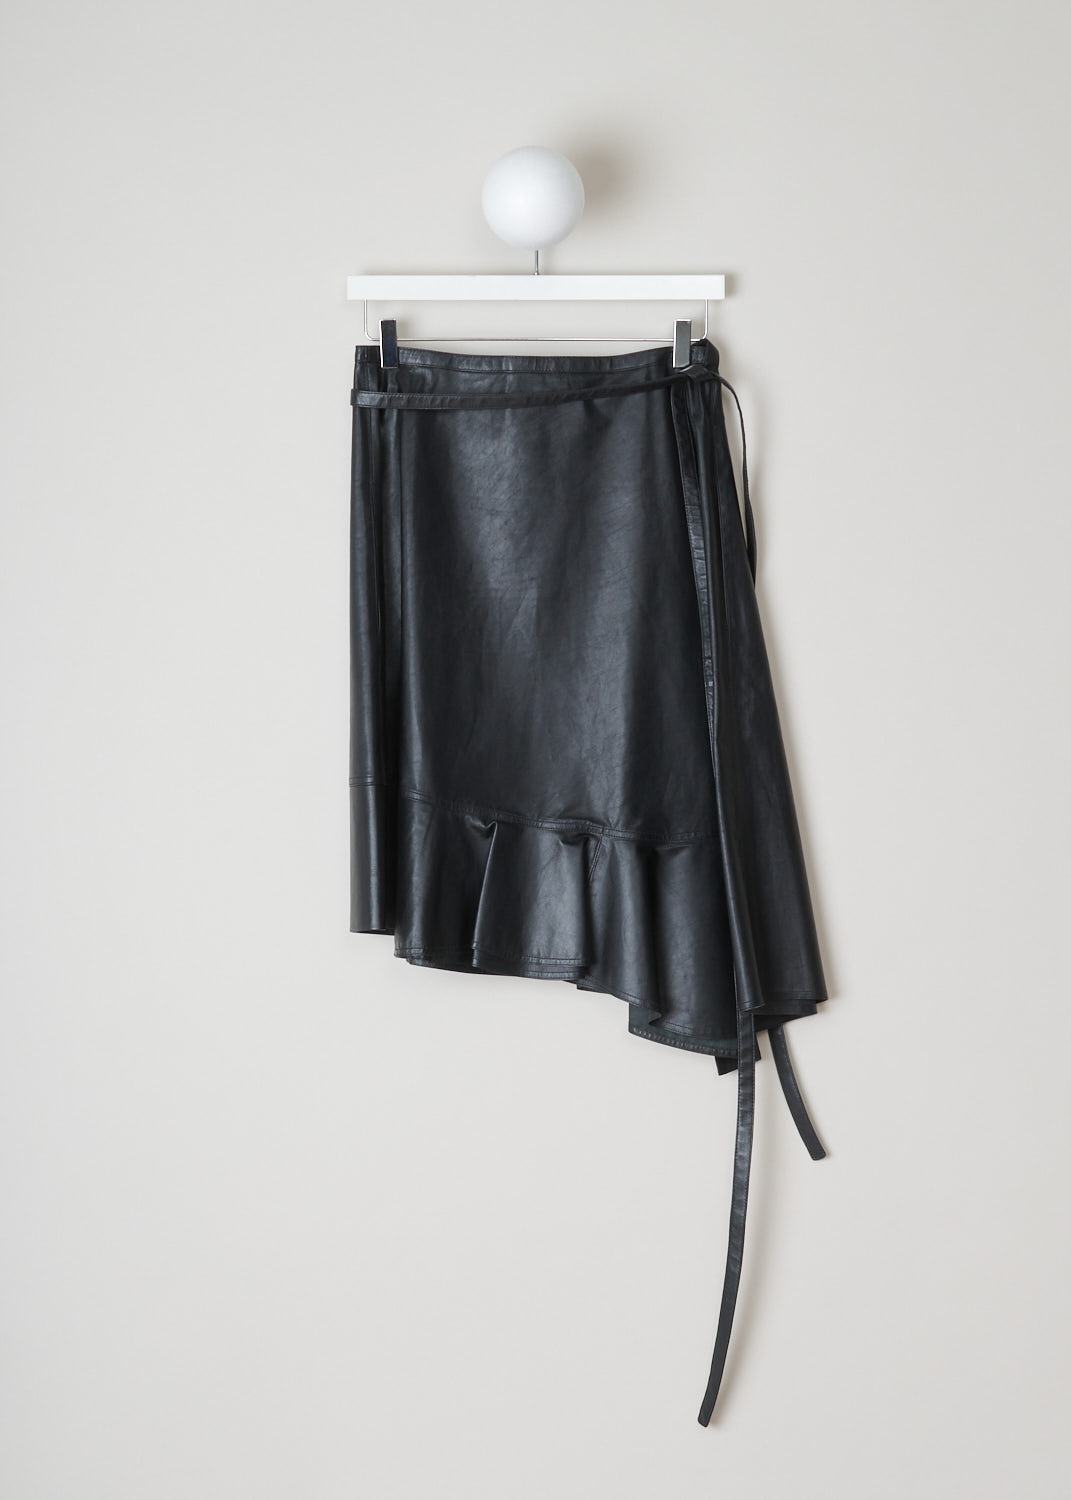 CÃ©line, Asymmetrical black leather wrap skirt, 045A_22081_ONO_C01, black, back, Wrap skirt crafted in calf leather, the softest kind of leather. This model features a backing button on the inside. Beside that, it has two leather ribbons that can be used as fastening option, or can be tied in various decorative knots. Furthermore, this model has concealed pockets on the side seam.